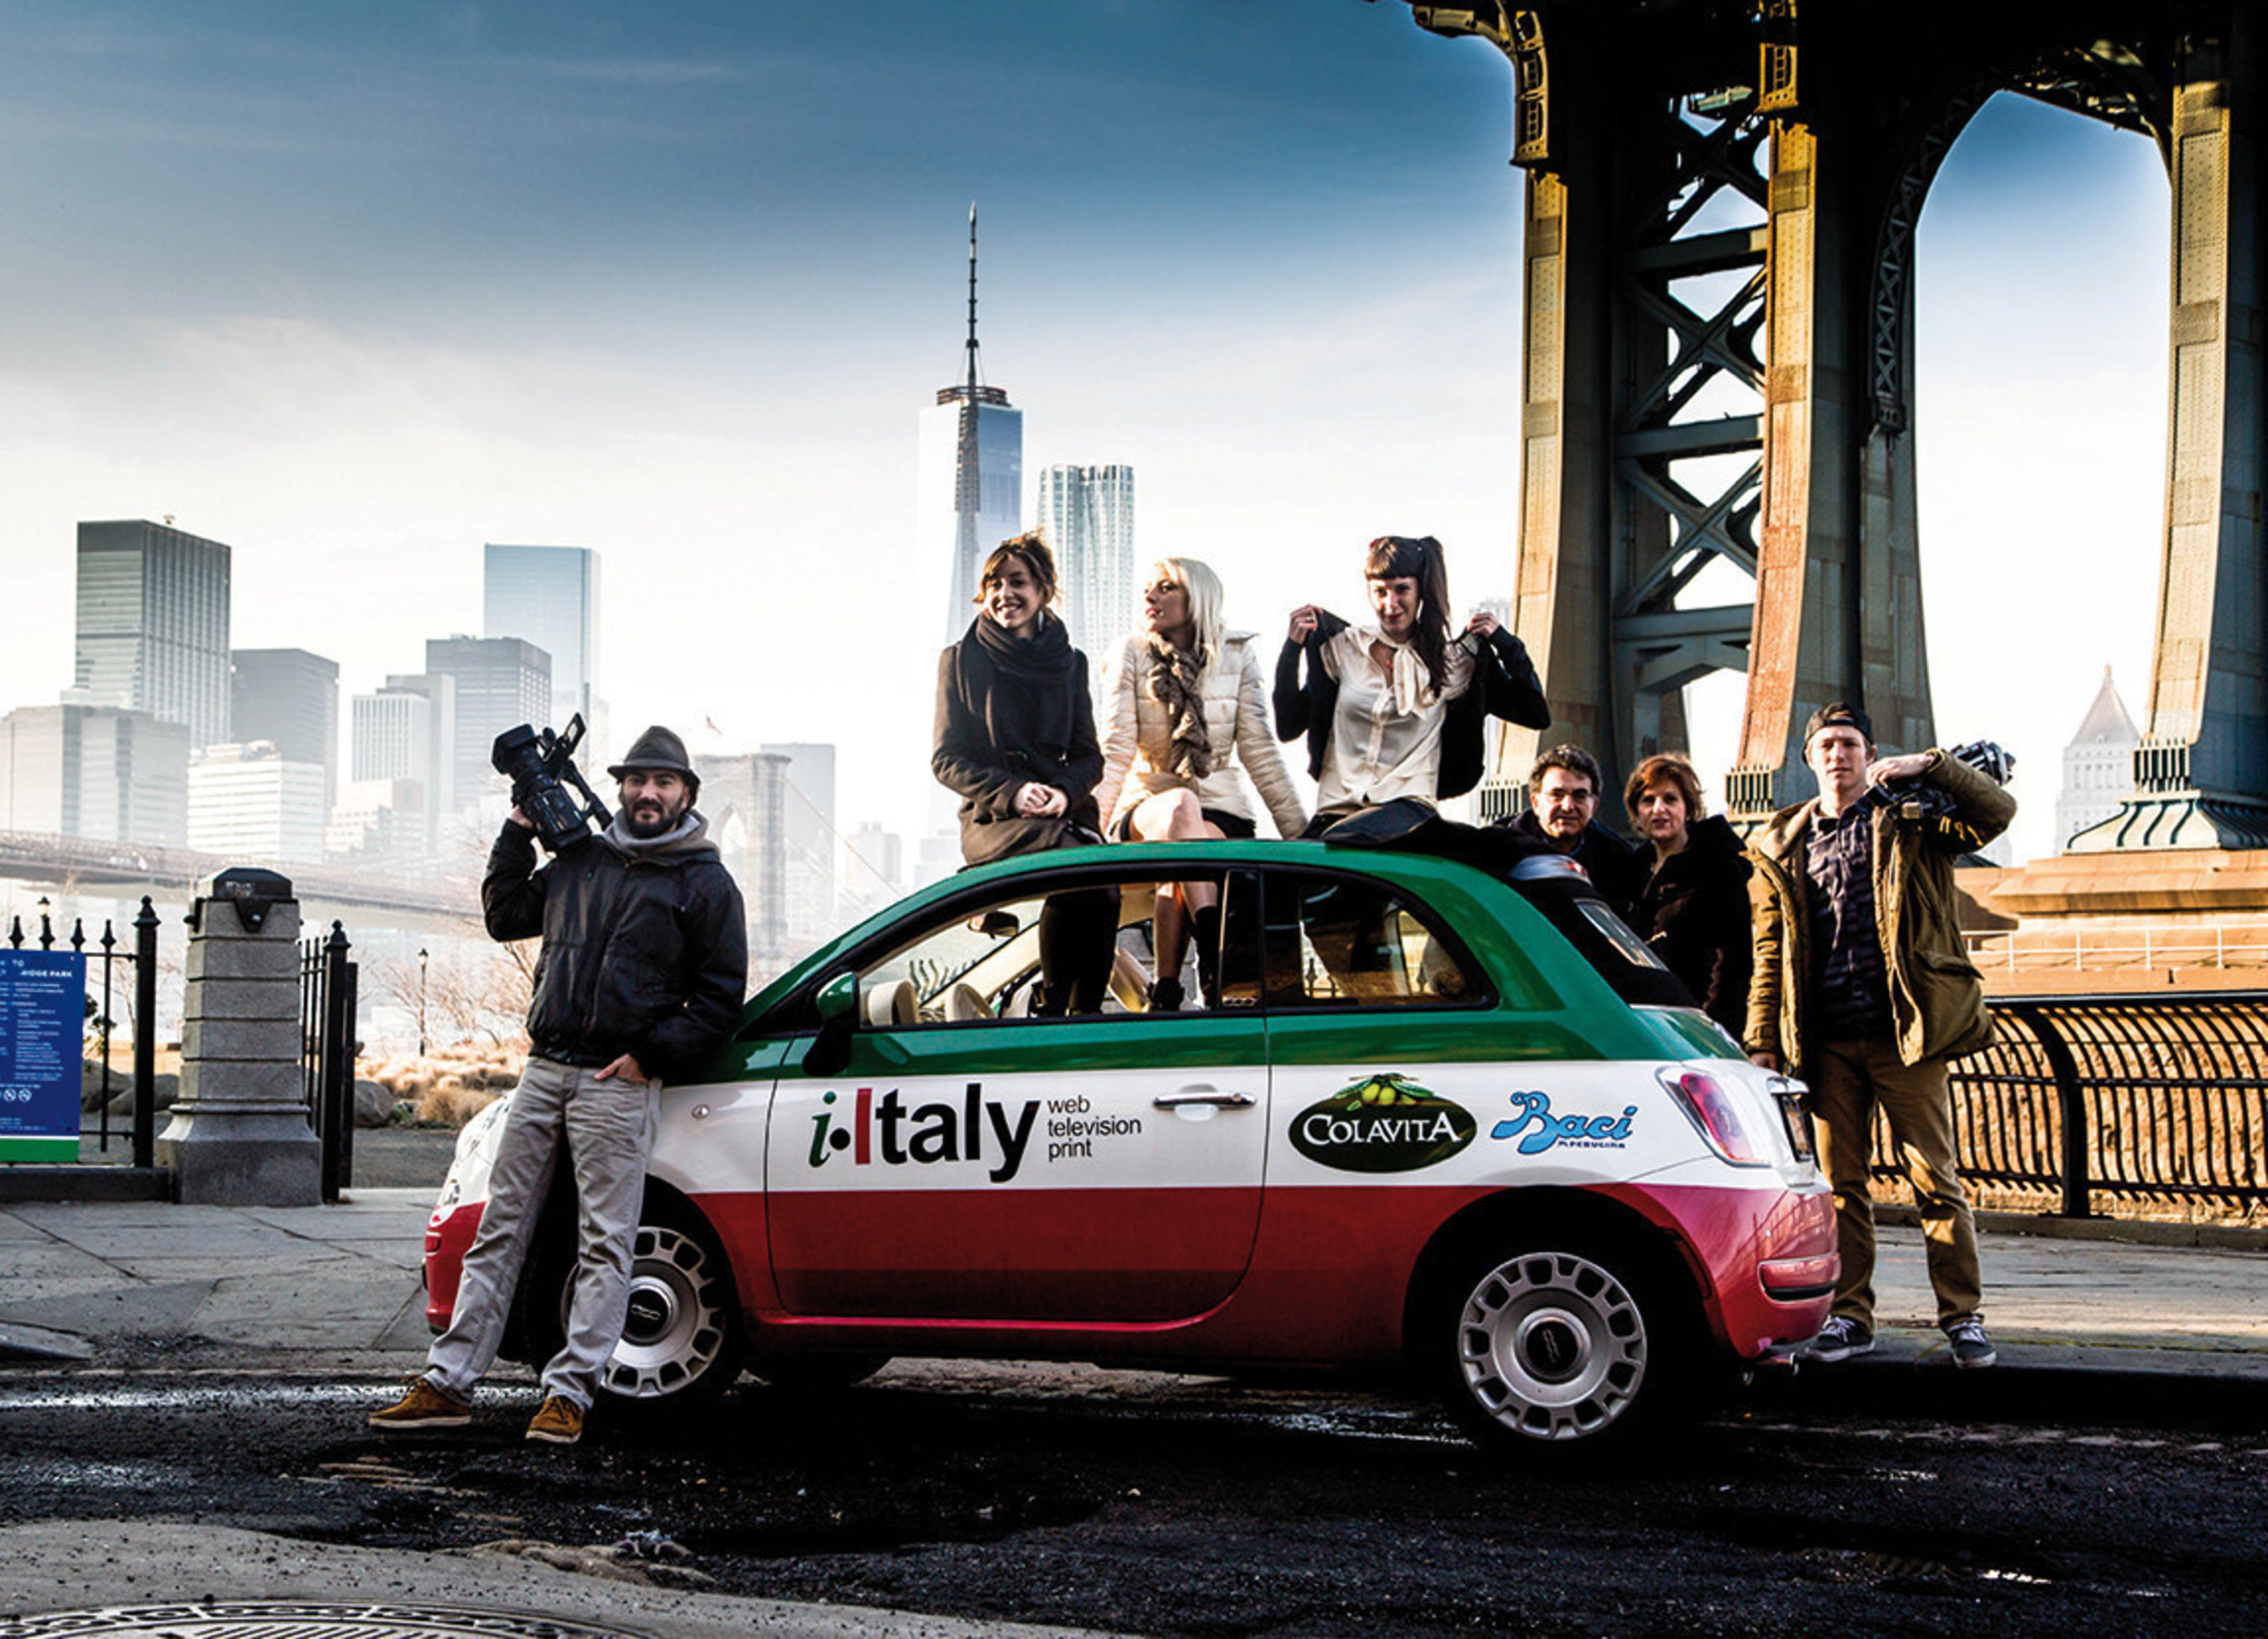 The i-Italy team with their tricolored Fiat 500 in Brooklyn, NYC